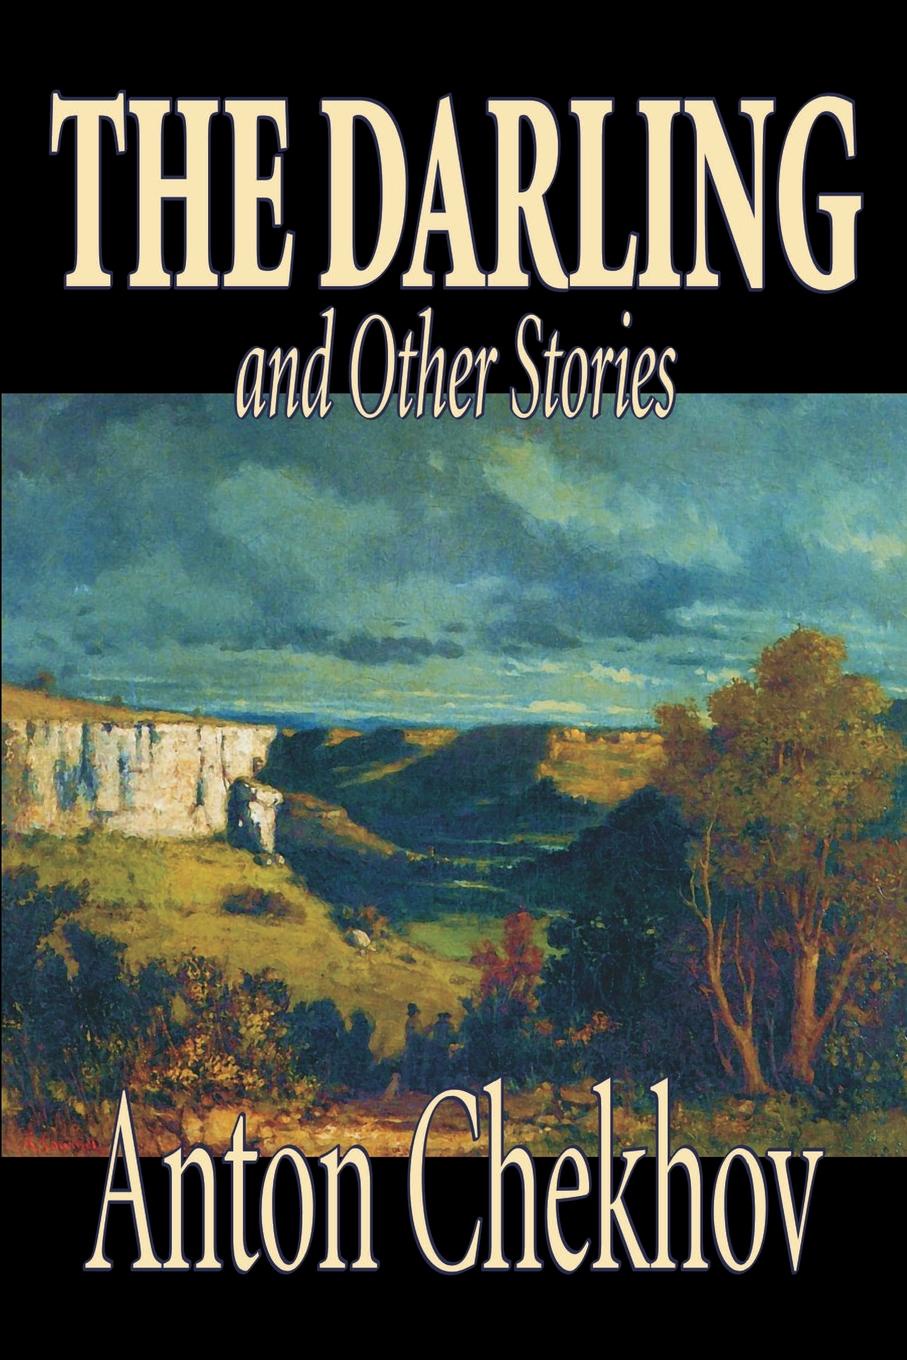 The Darling and Other Stories by Anton Chekhov, Fiction, Short Stories